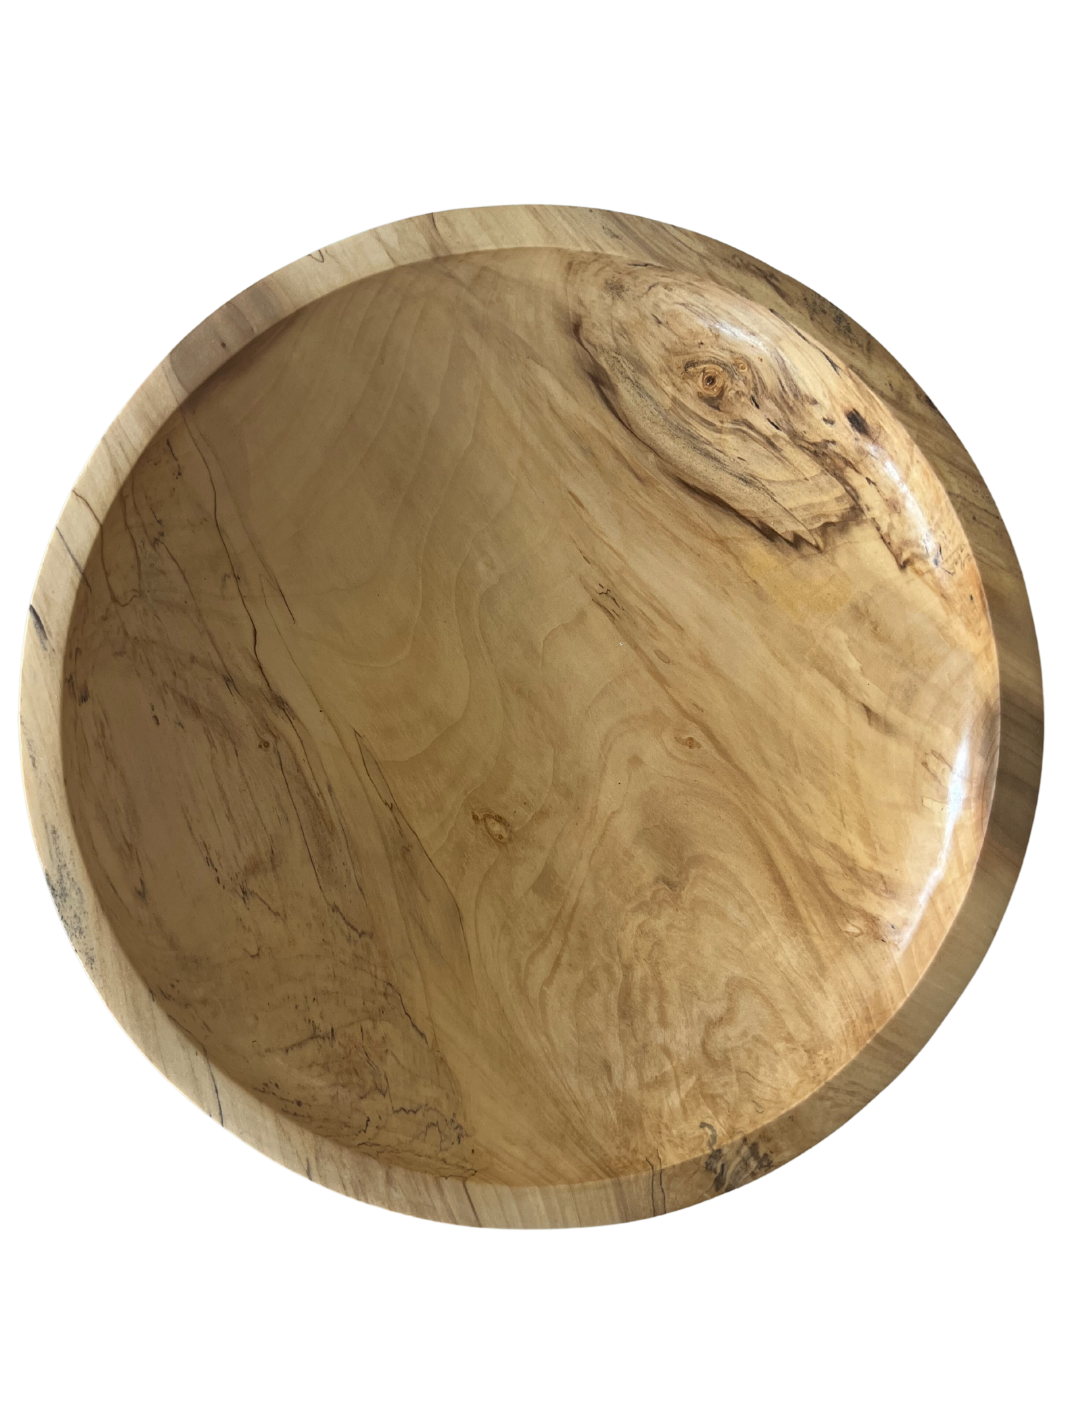 Spalted Birch Shallow Bowl